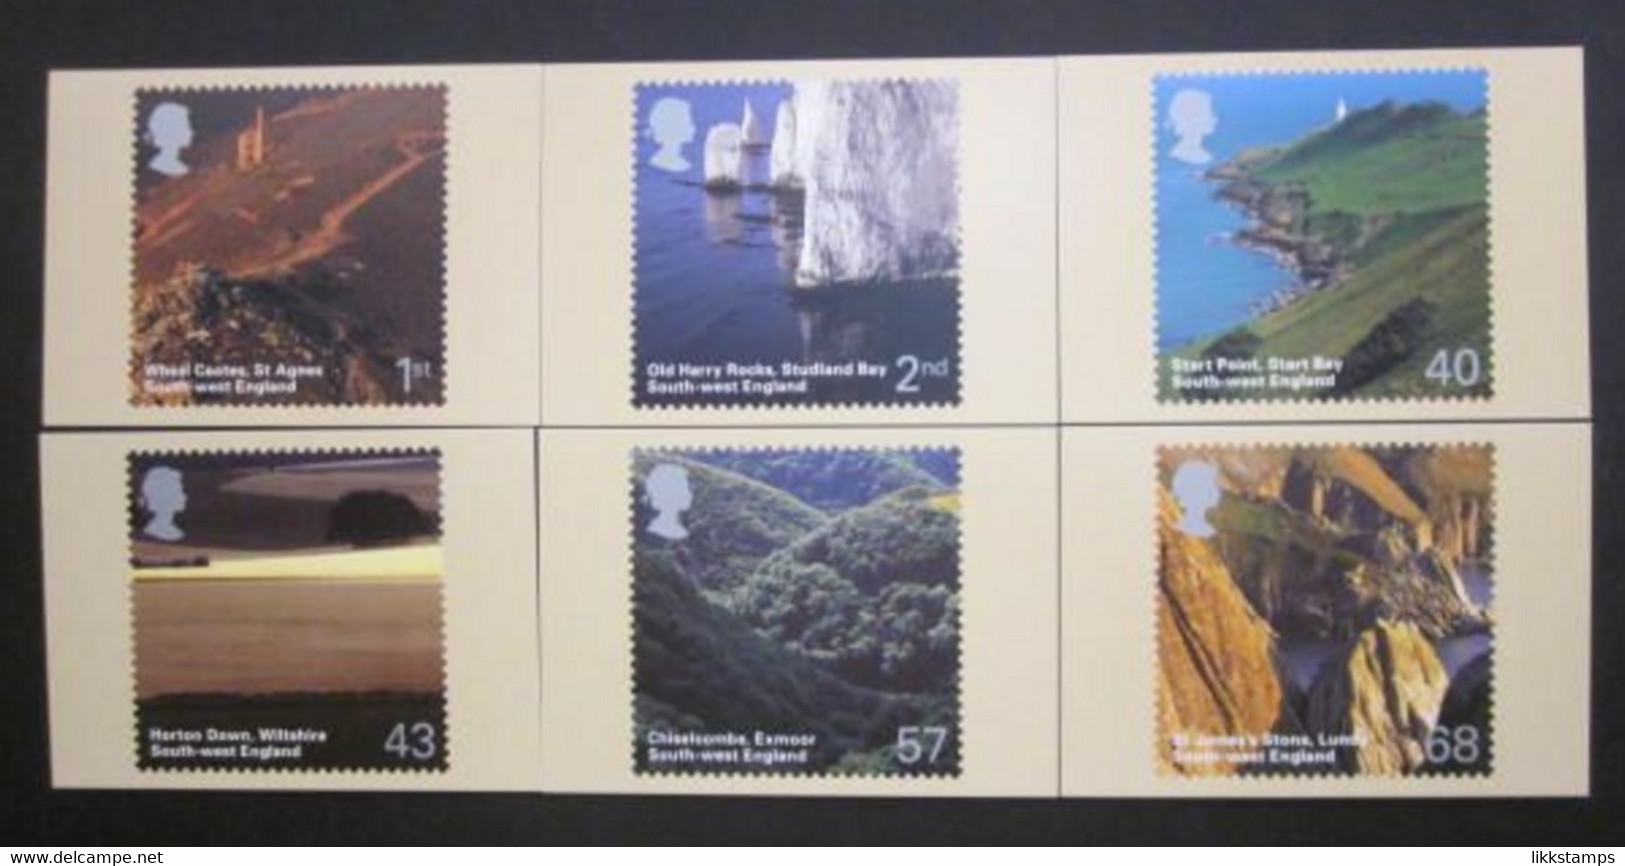 2005 SOUTH WEST ENGLAND P.H.Q. CARDS UNUSED, ISSUE No. 272 (B) #00844 - PHQ Karten